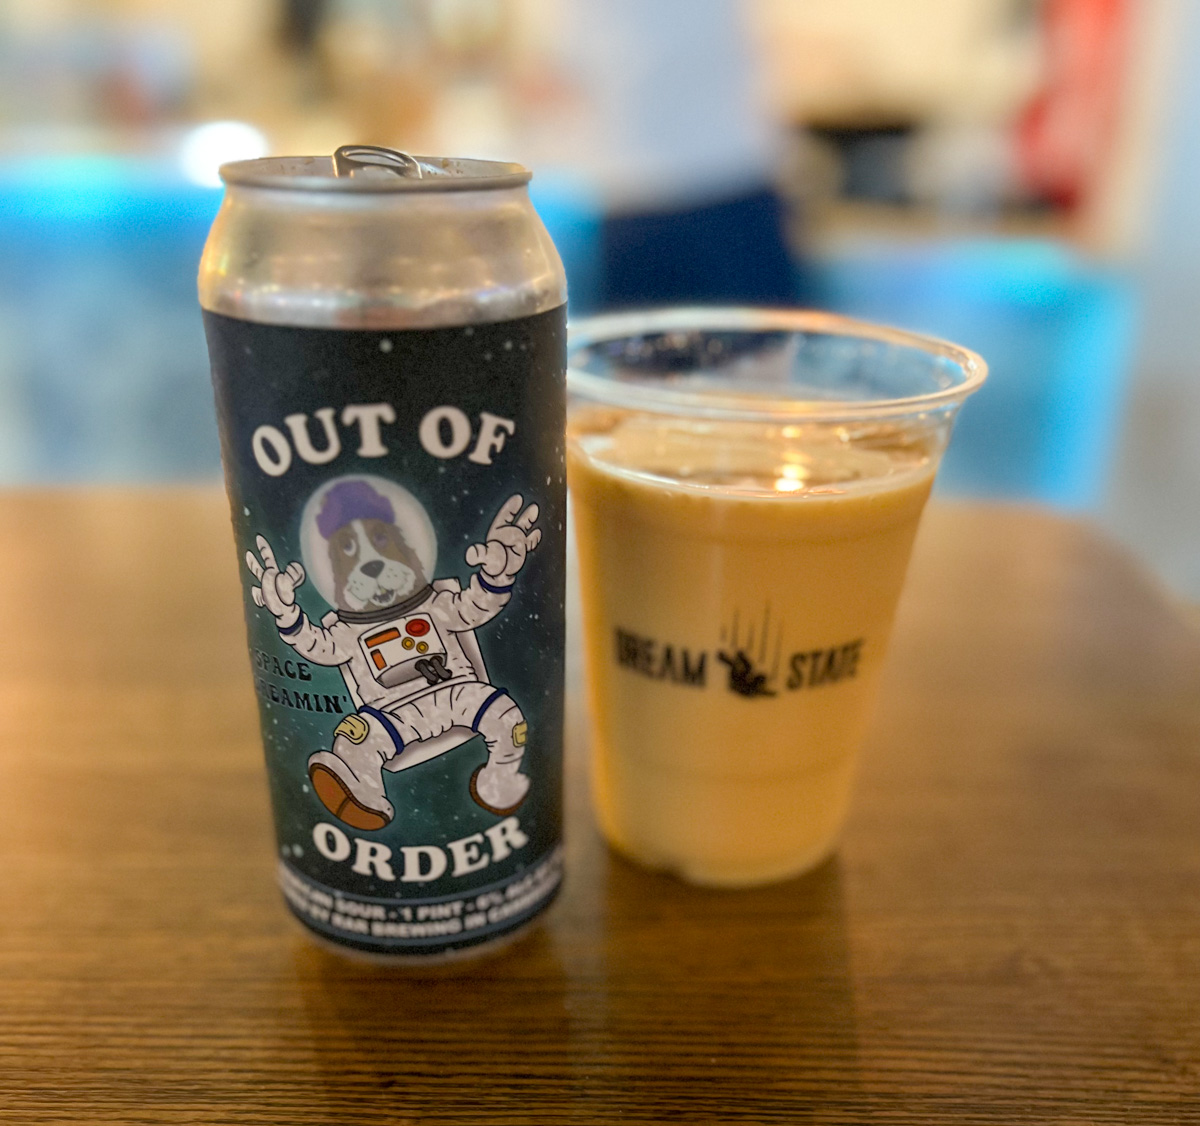 Out of Order: Space Dreamin' - Dream State Brewing | ViewFromALove